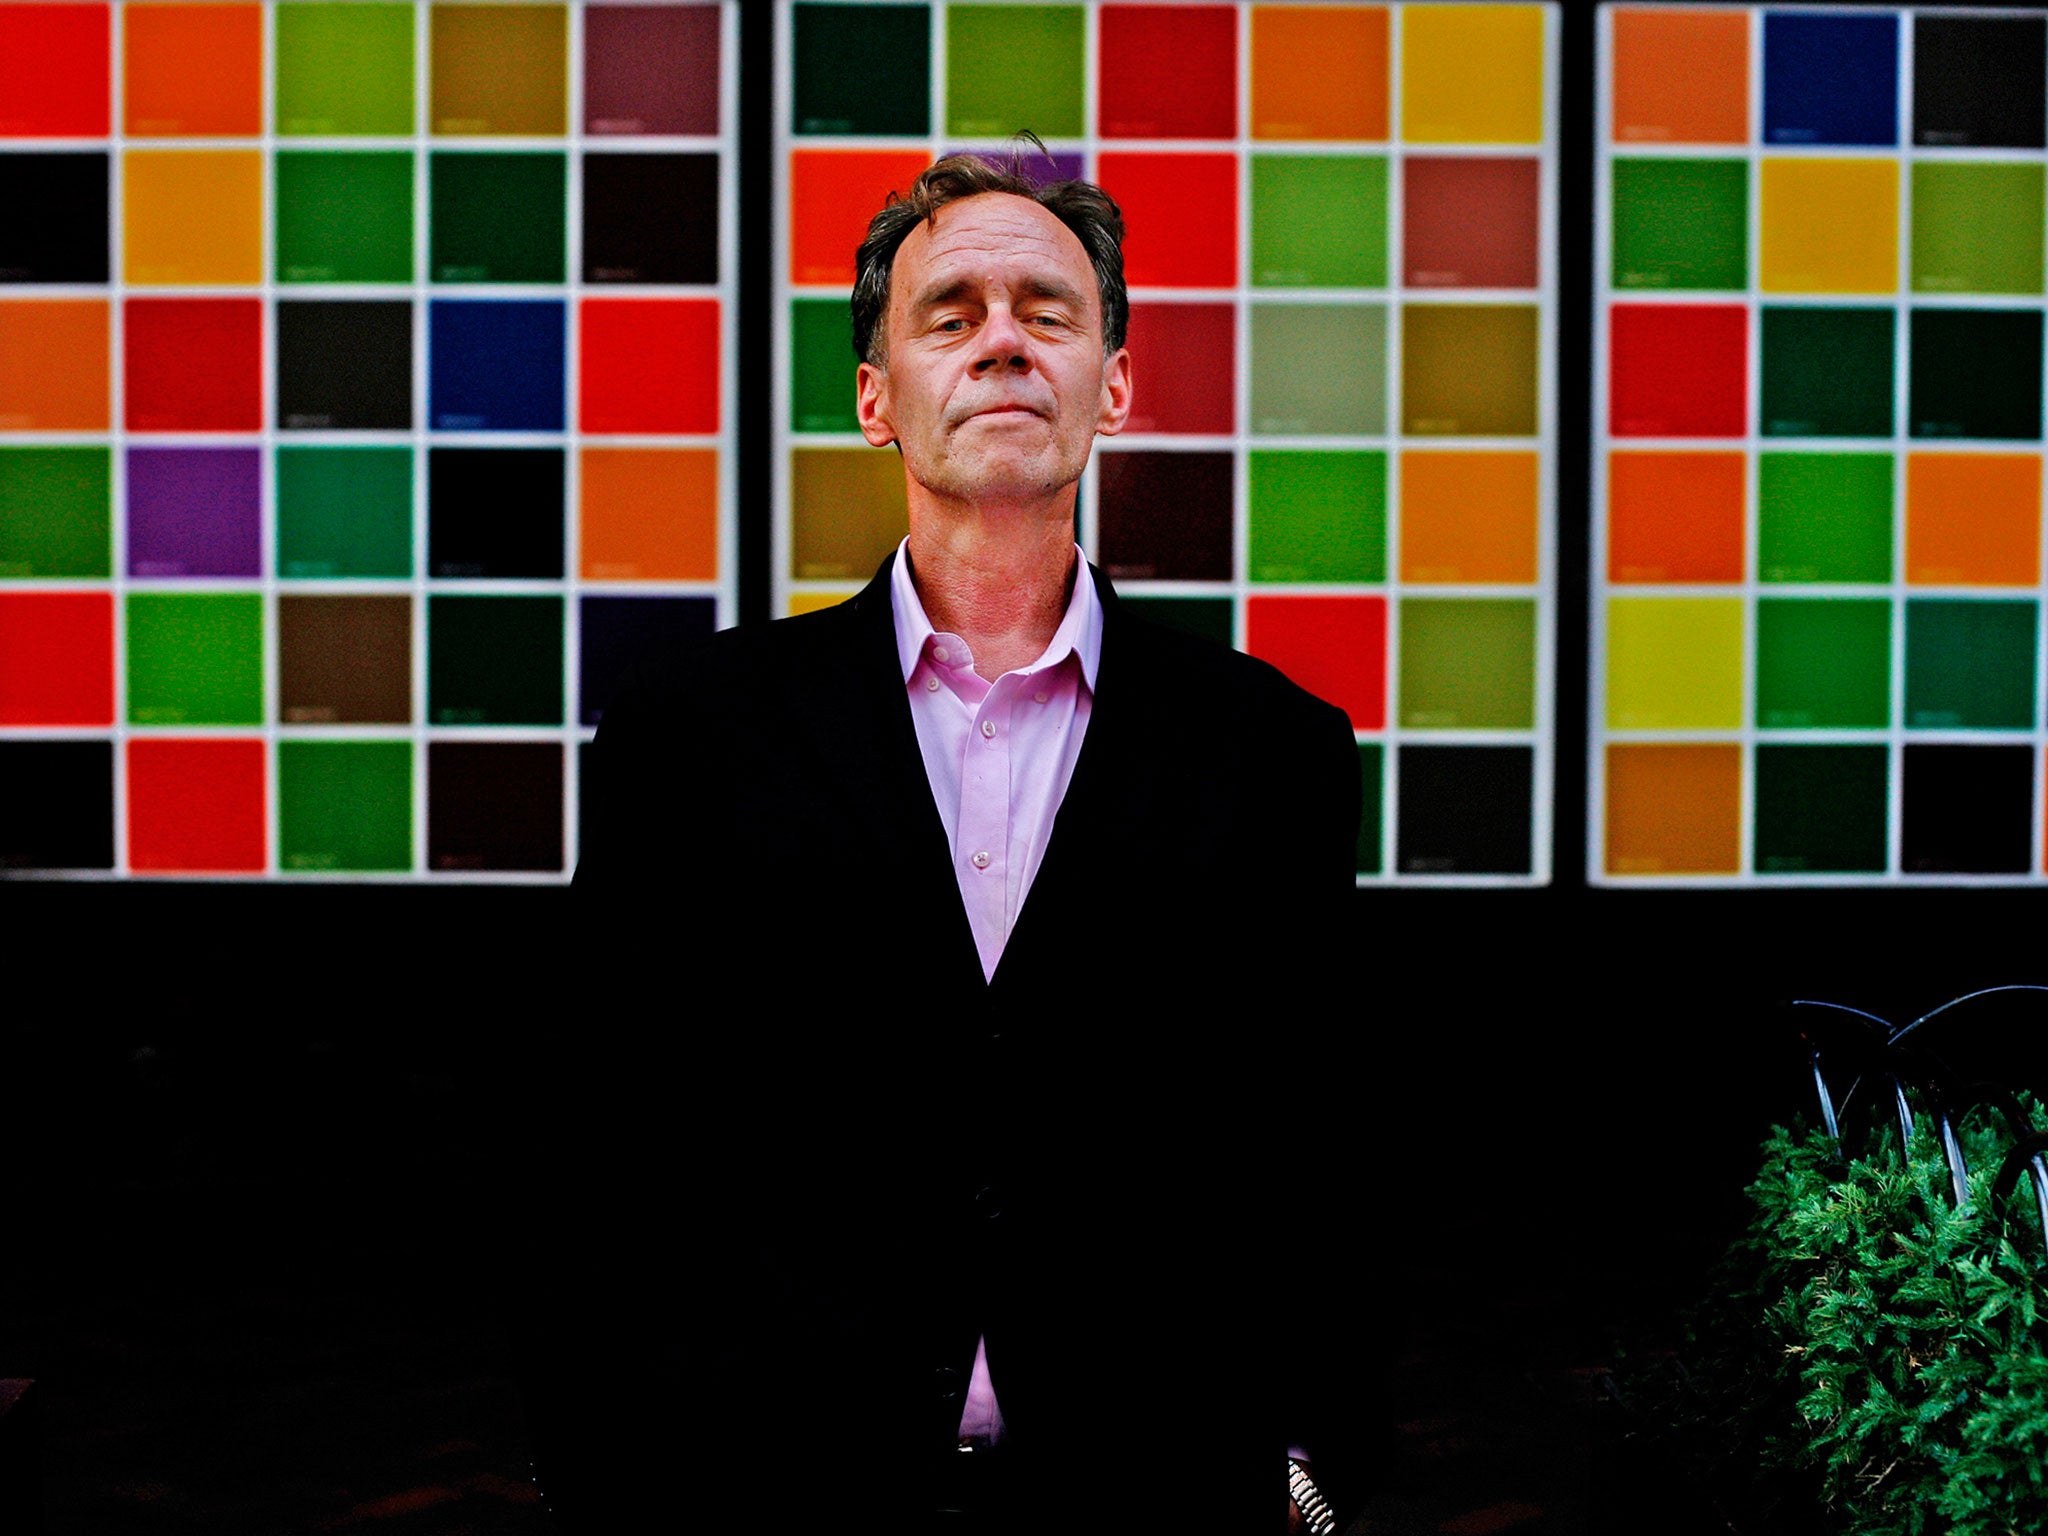 David Carr, the New York Times reporter and columnist who died suddenly on Thursday night